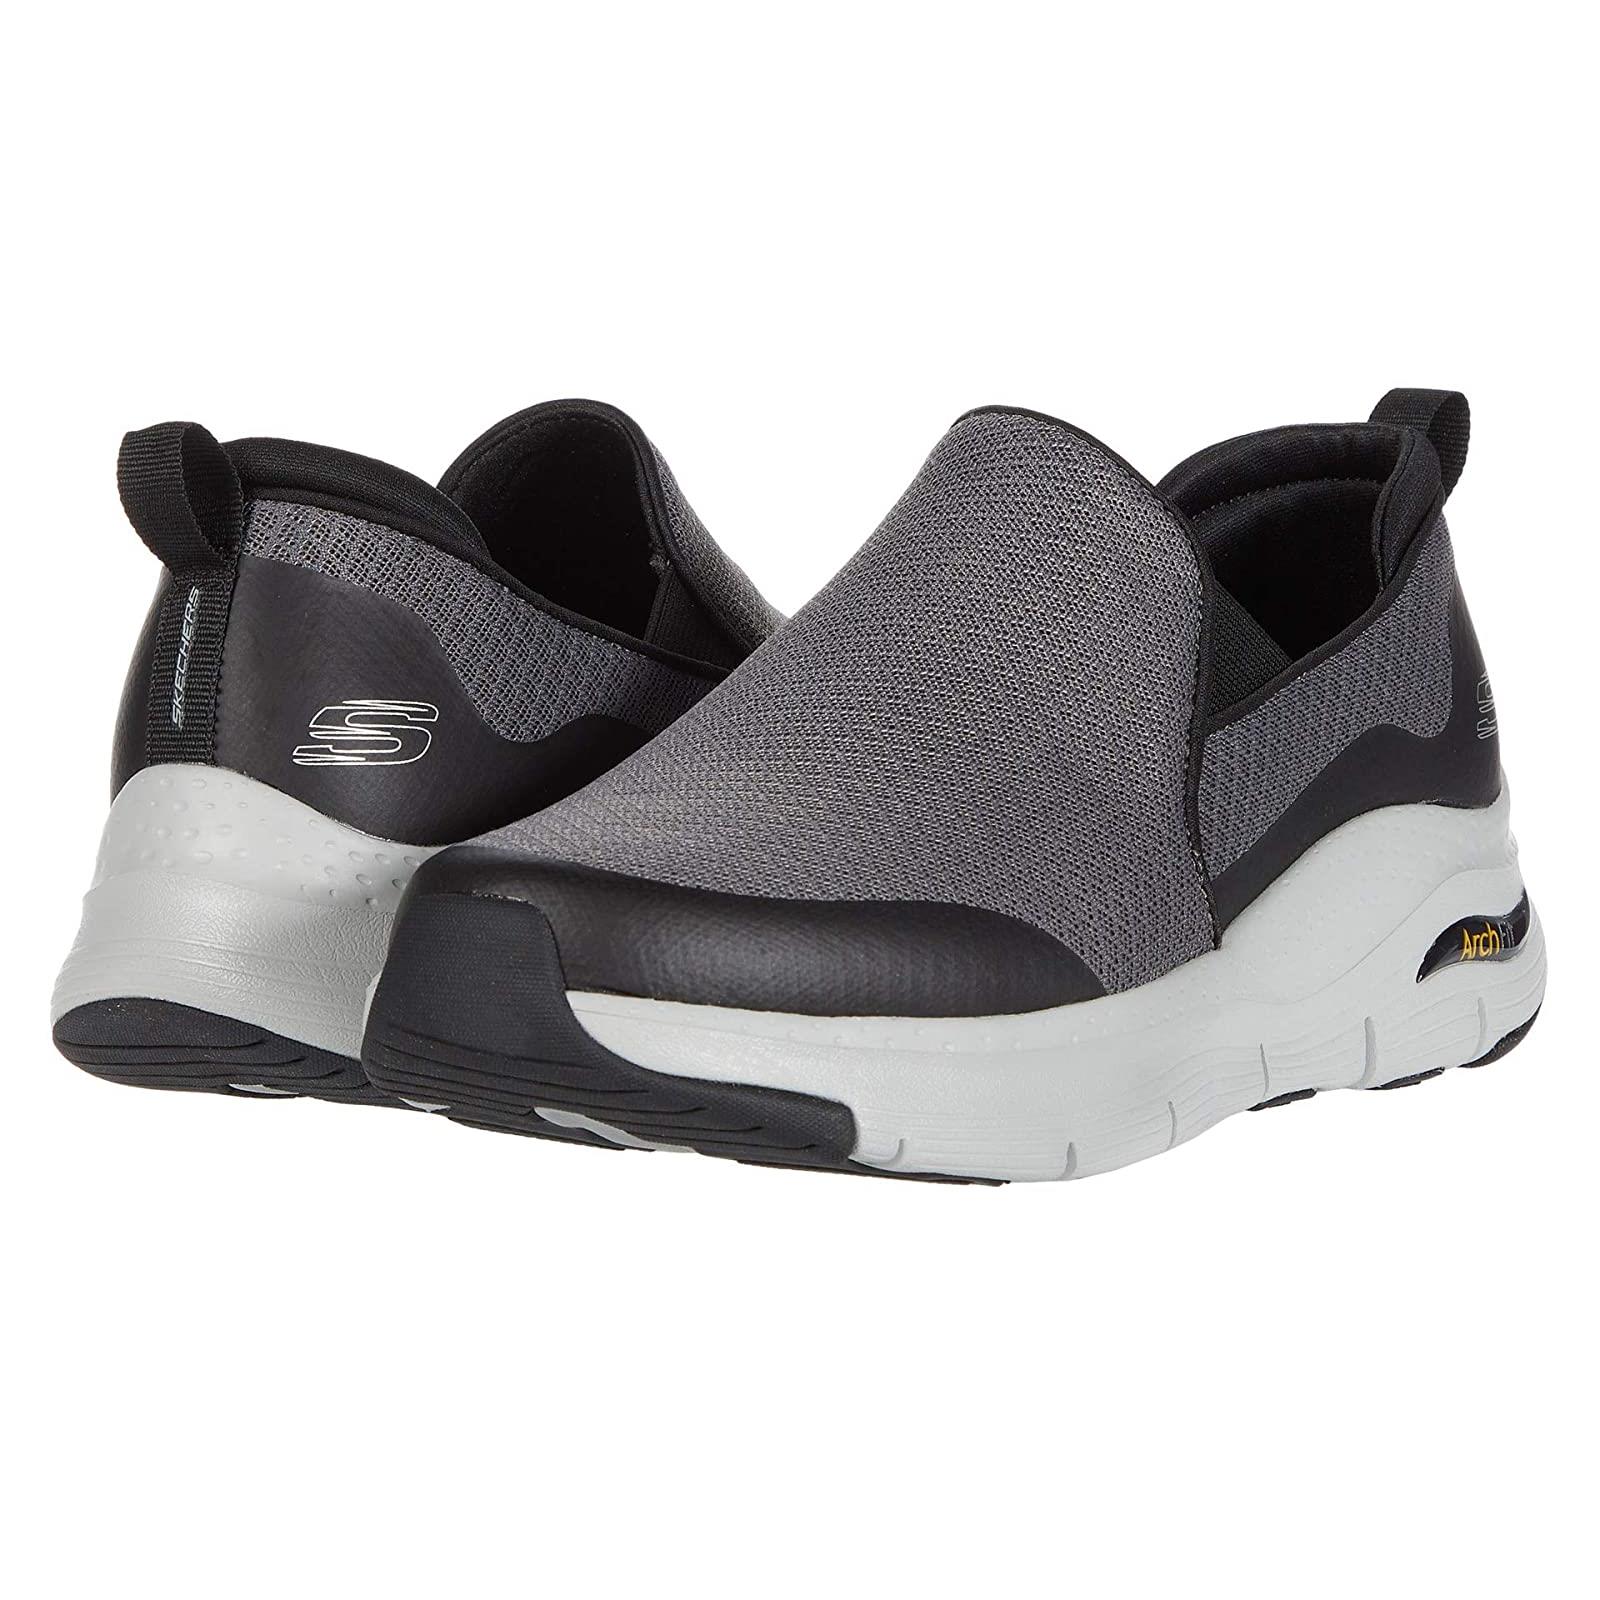 Man`s Sneakers Athletic Shoes Skechers Arch Fit Banlin Charcoal/Black